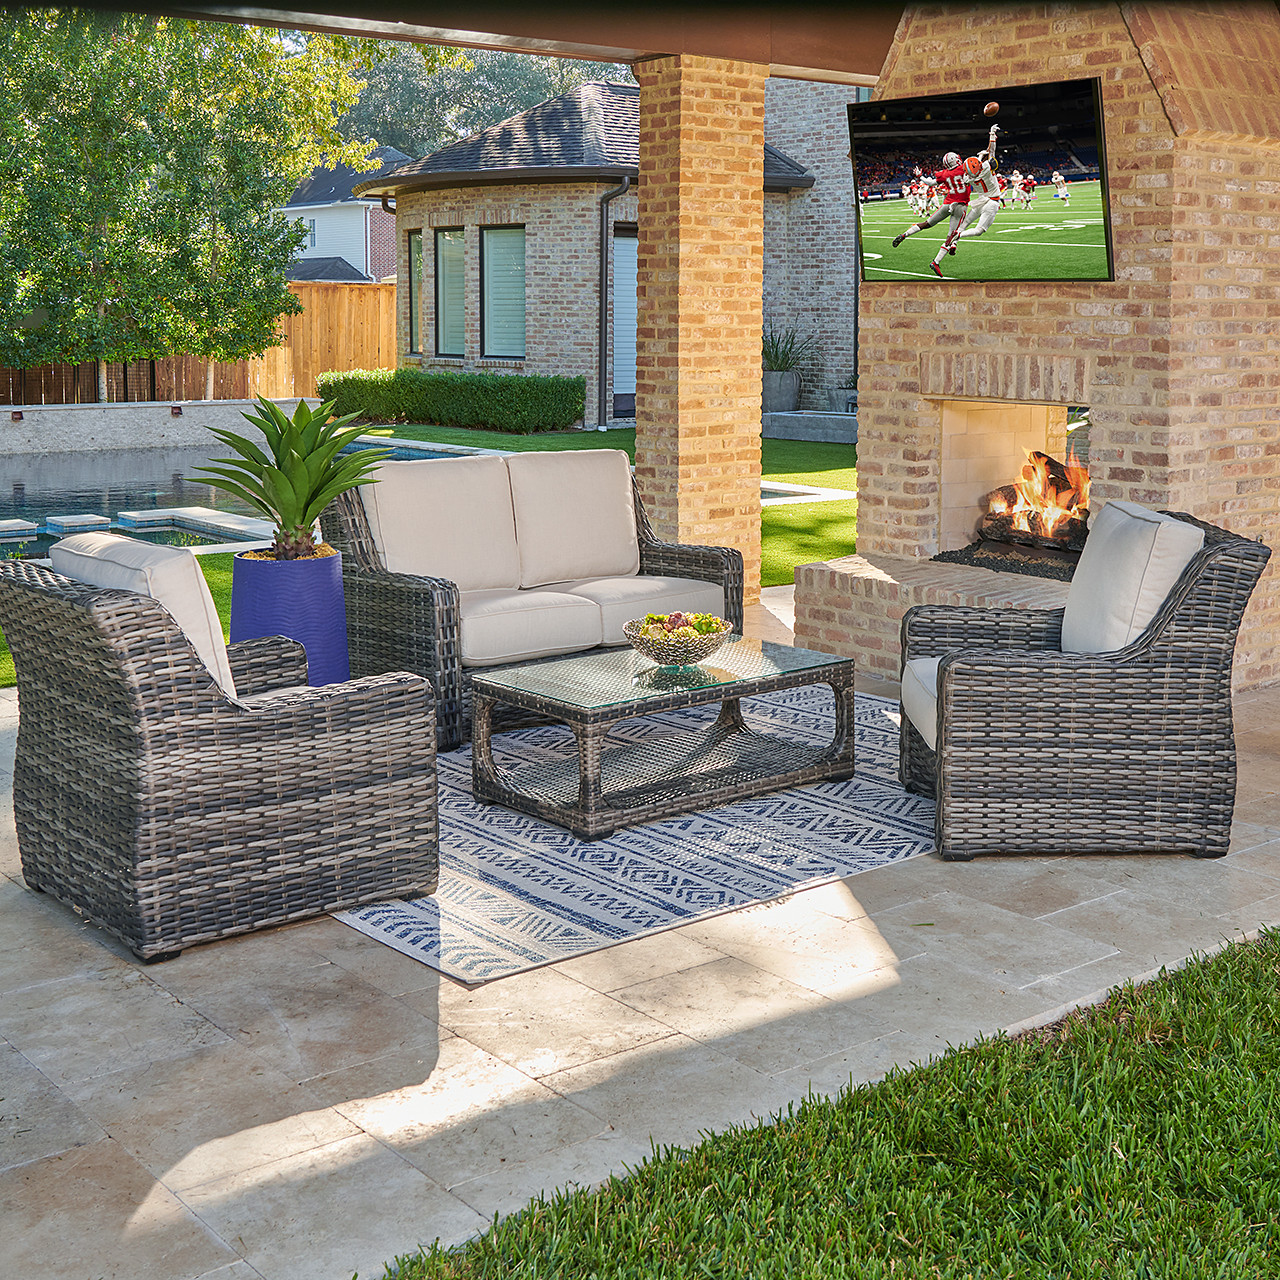 Tangiers Canola Seed Outdoor Wicker with Cushions 4 Piece Swivel Loveseat Group + 46 x 26 in. Glass Top Coffee Table